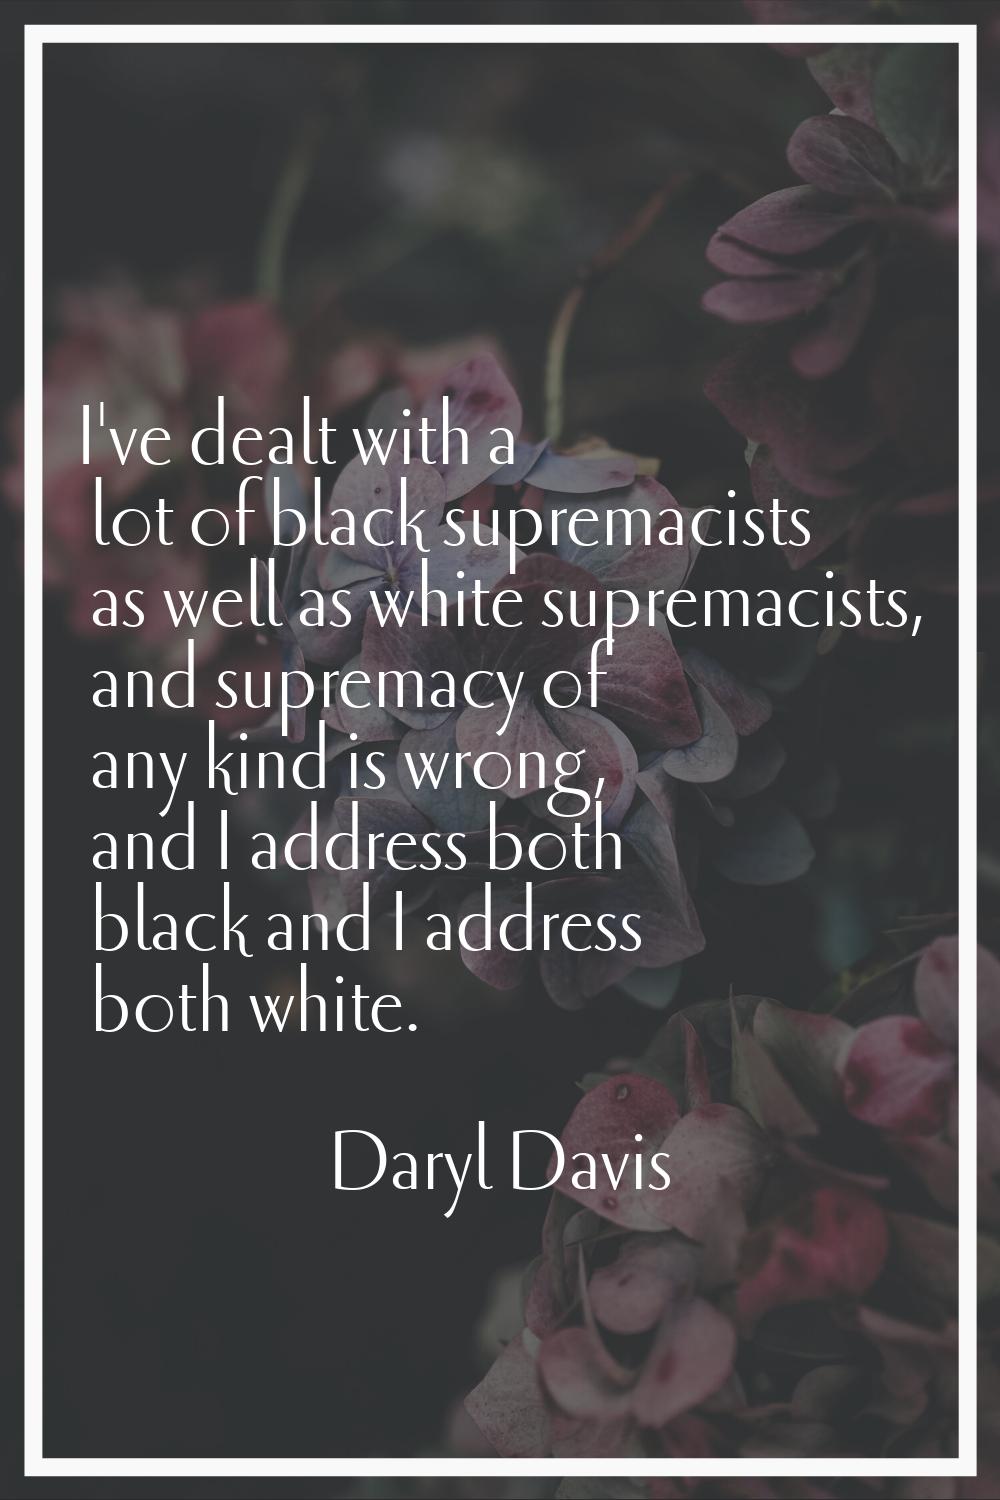 I've dealt with a lot of black supremacists as well as white supremacists, and supremacy of any kin